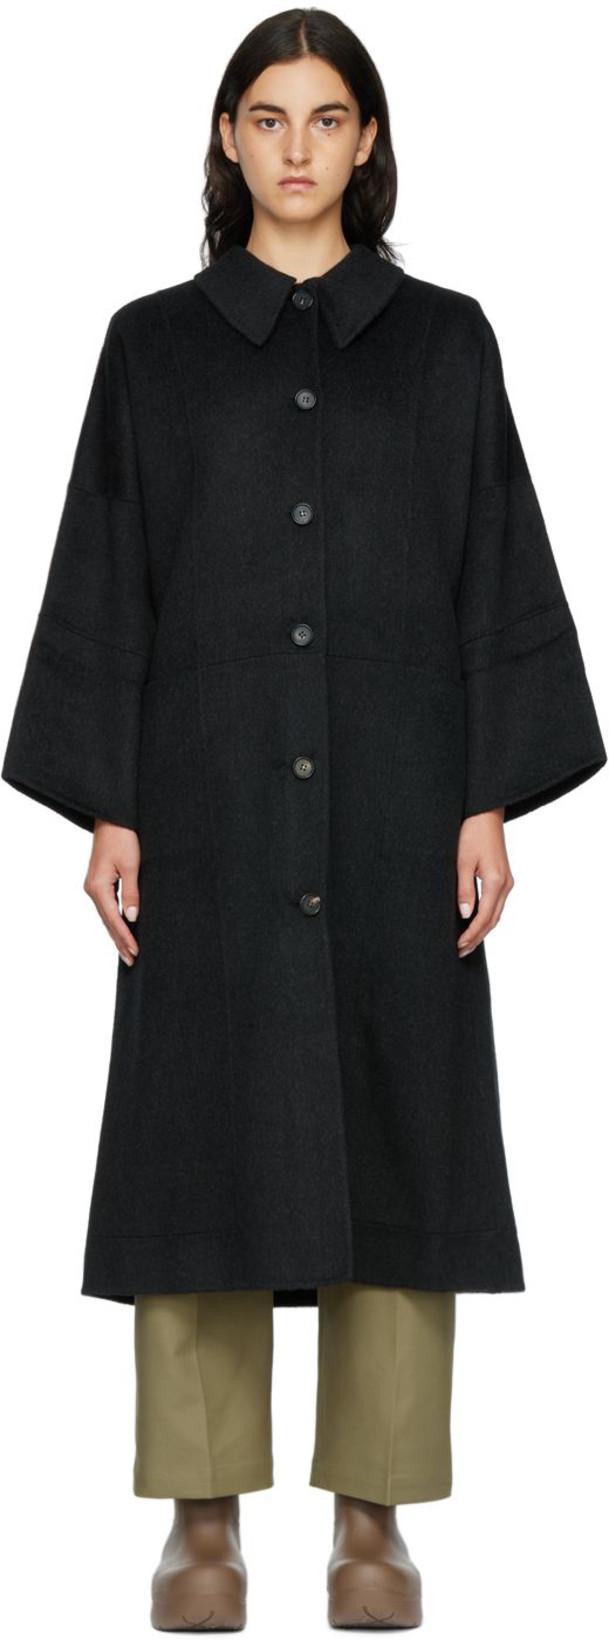 Black Oversized Coat by ARCH THE